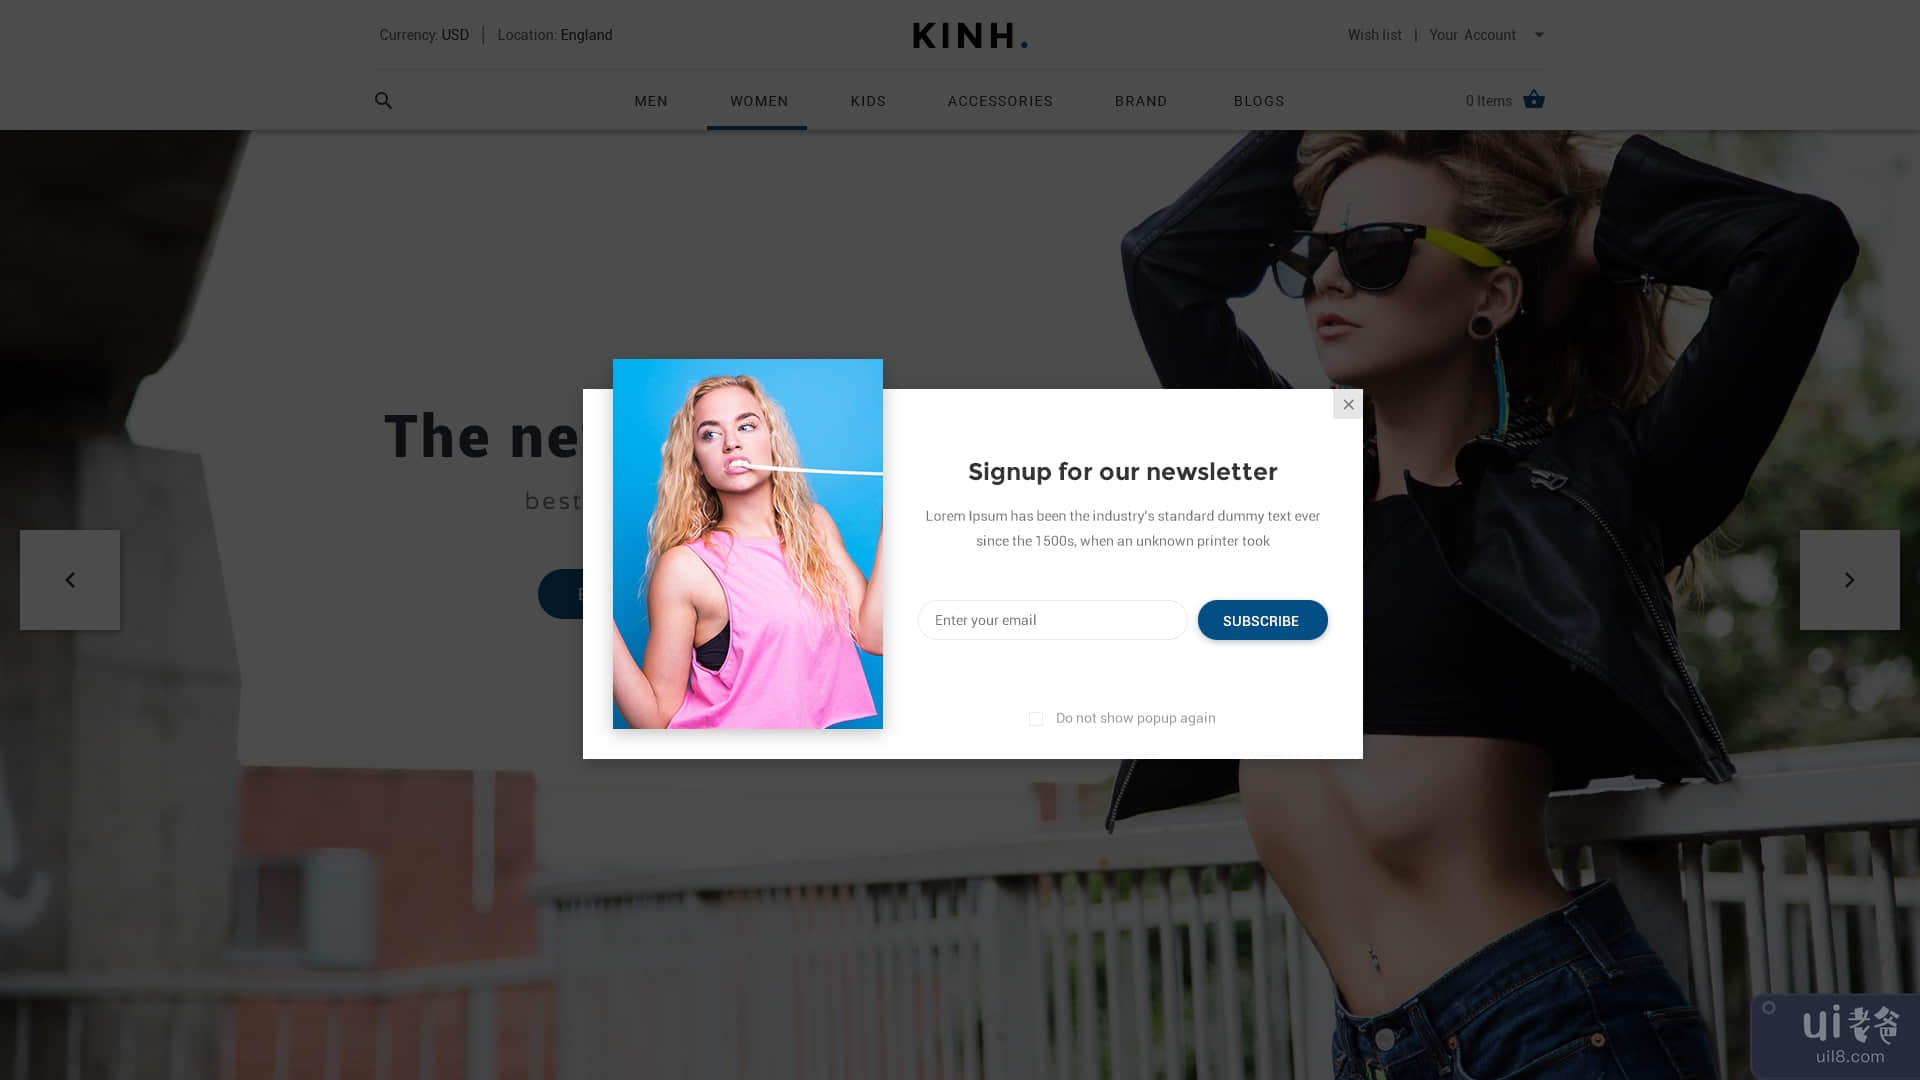 Kinh - 材料电子商务 PSD 模板(Kinh - Material E-Commerce PSD Template)插图4